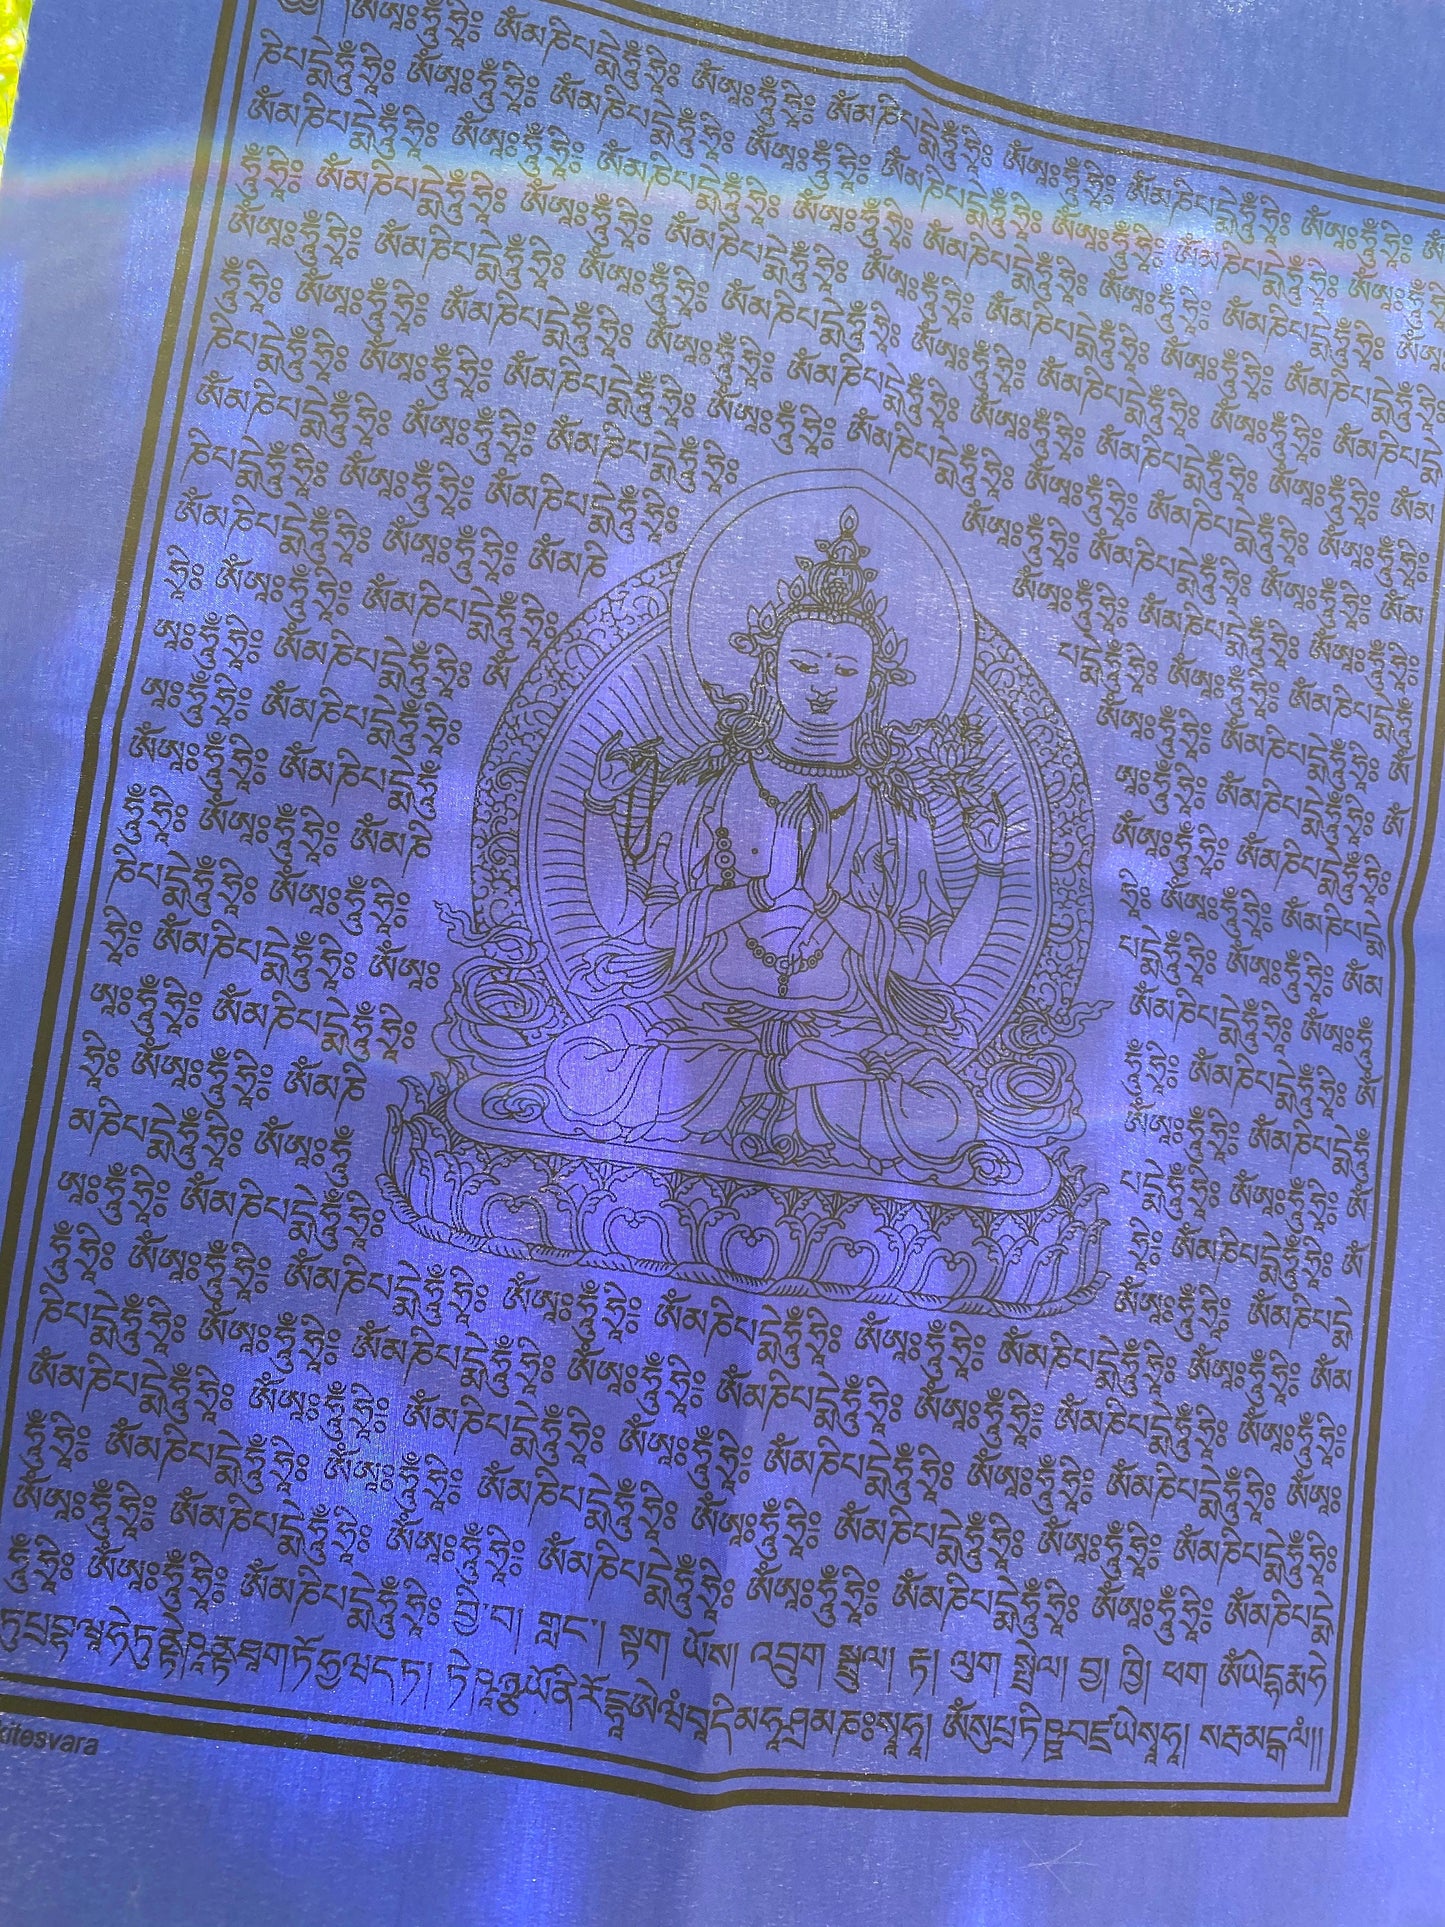 A close up of 1 blue Chenrezig prayer flag in 5 colors, each 14x17 inches, depicting the Buddha of Compassion hanging outdoors.